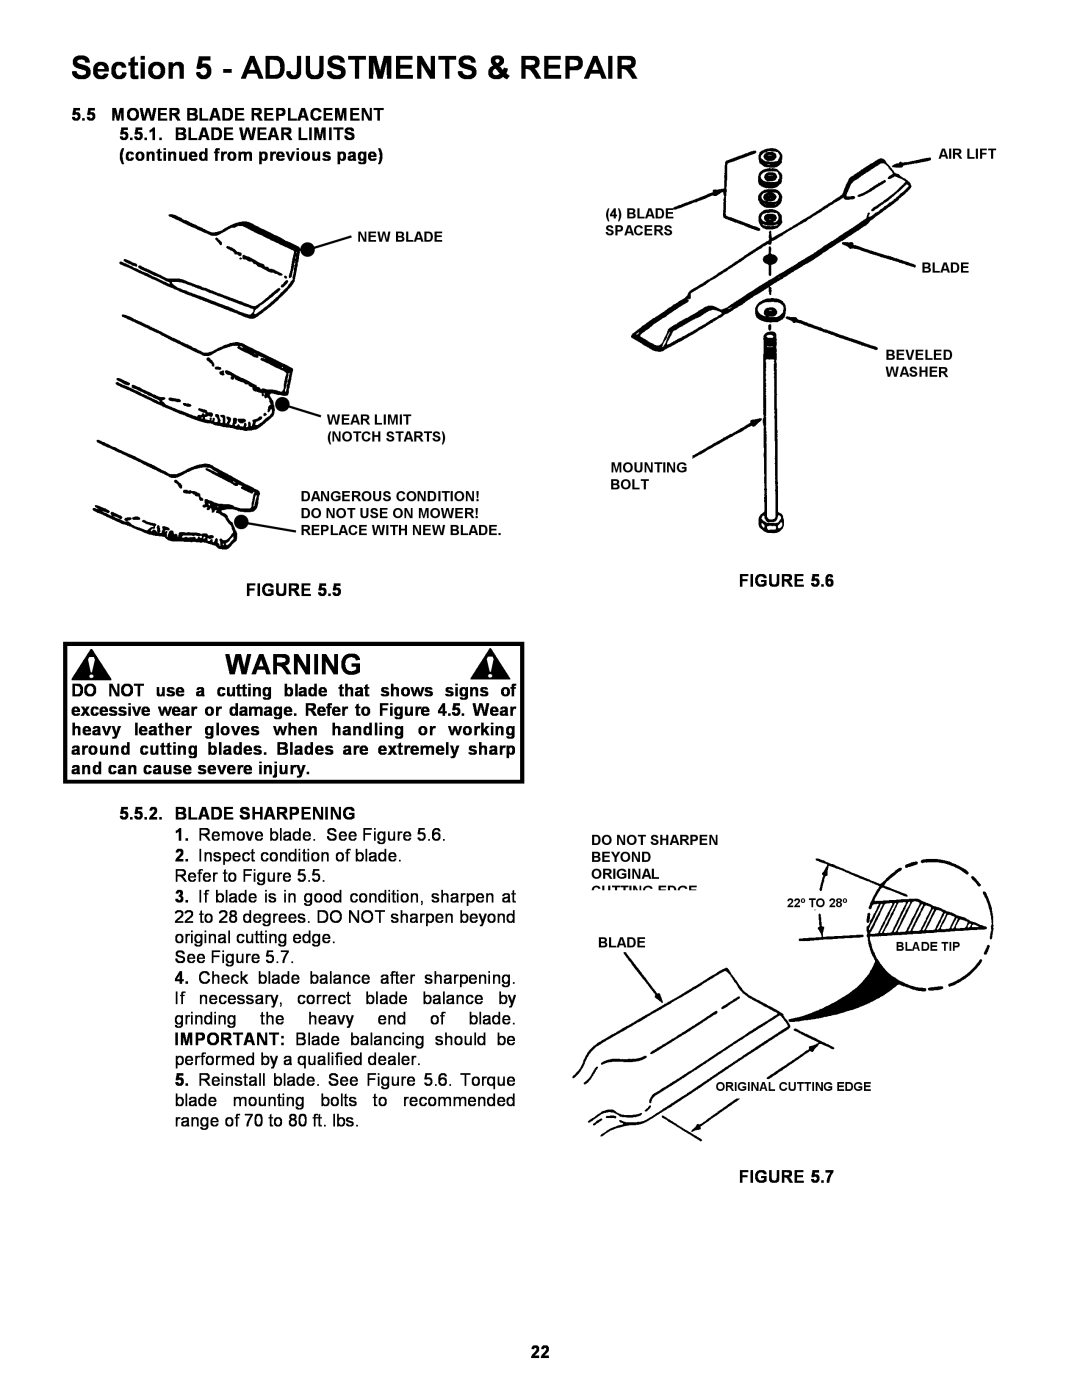 Snapper ZF2101DKU Adjustments & Repair, MOWER BLADE REPLACEMENT 5.5.1. BLADE WEAR LIMITS, continued from previous page 